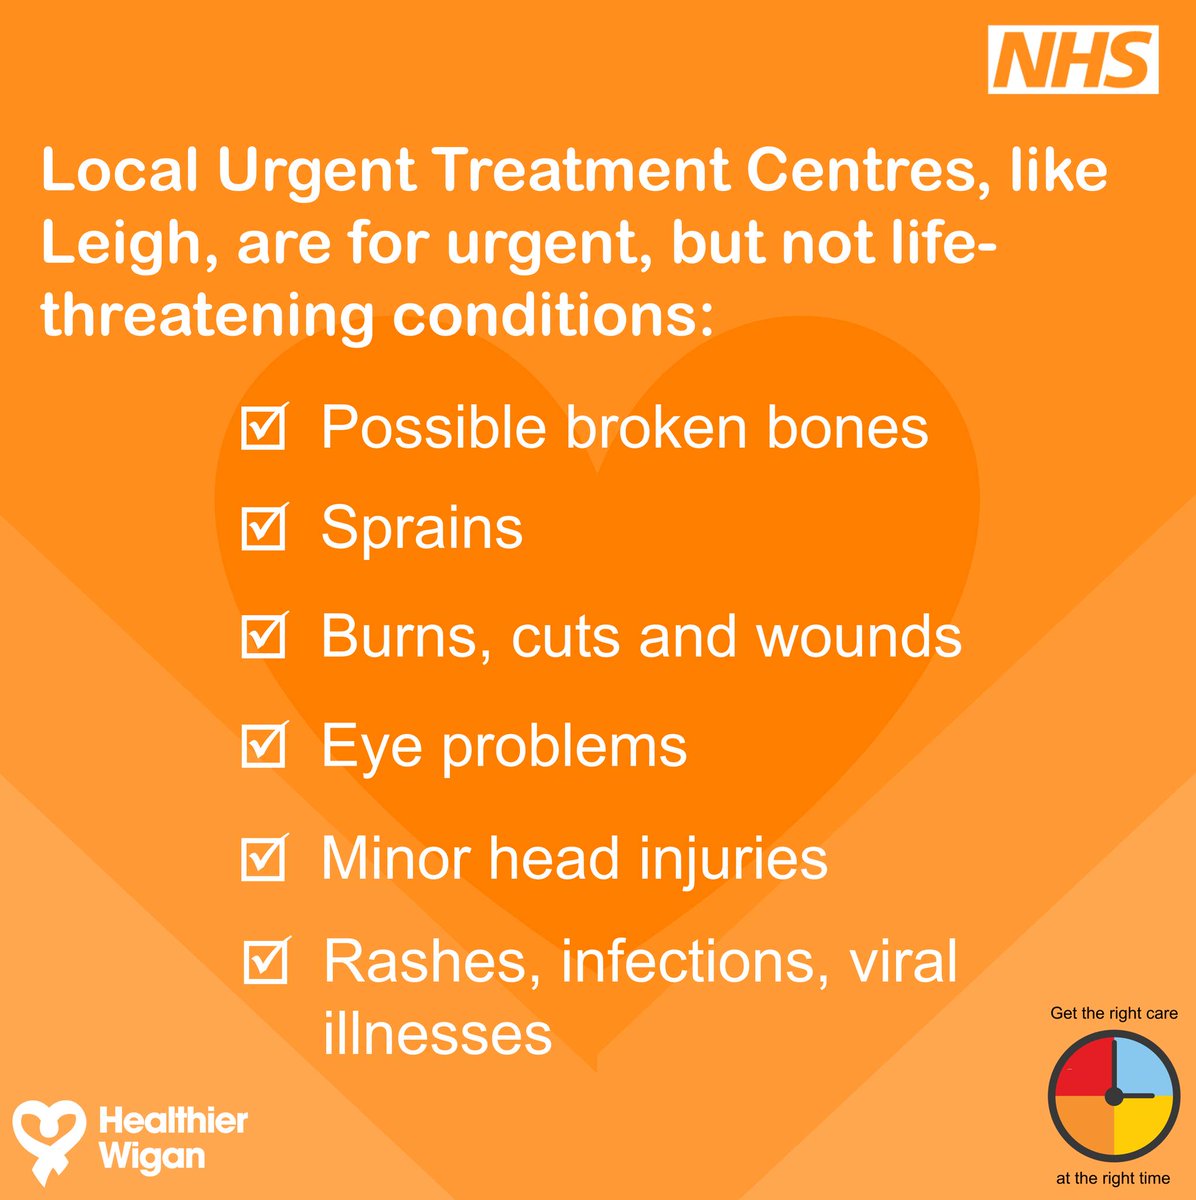 Did you know our Borough’s Walk-In centres can treat a range of urgent medical conditions?
The Walk-in-Centre in Leigh is open 365 days a year, including bank holidays from 7am-9pm
Think #111First or contact your GP, pharmacist, dentist, or A&E if absolutely necessary